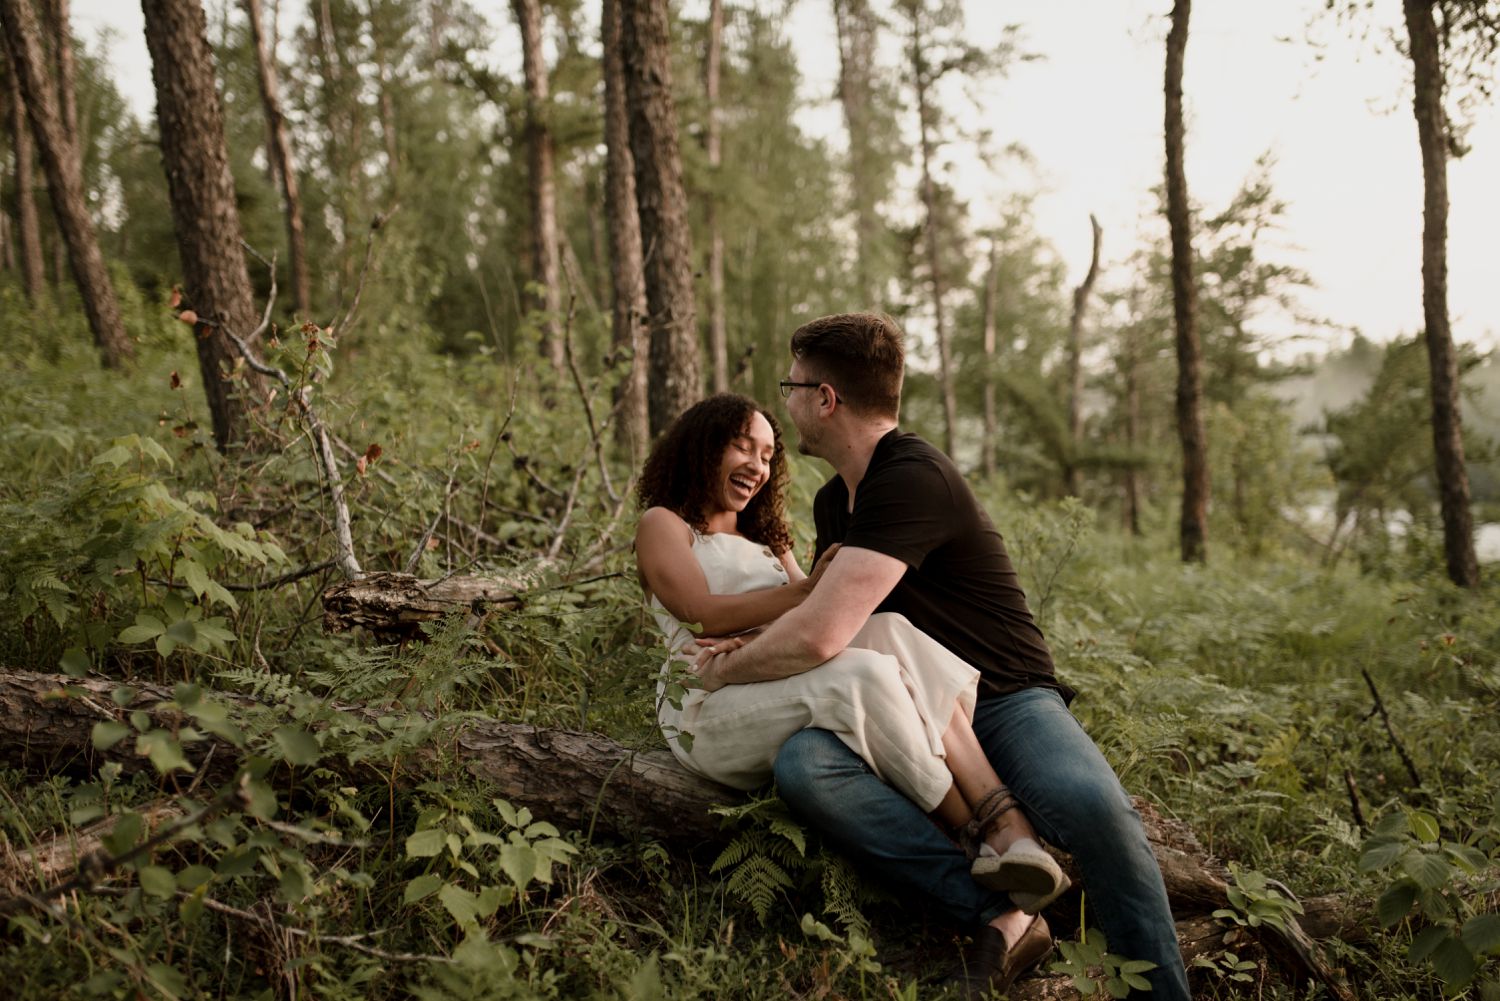 Summer honeymoon session in Sandilands, photographed by Vanessa Renae Photography, a Calgary engagement photographer, available across canada